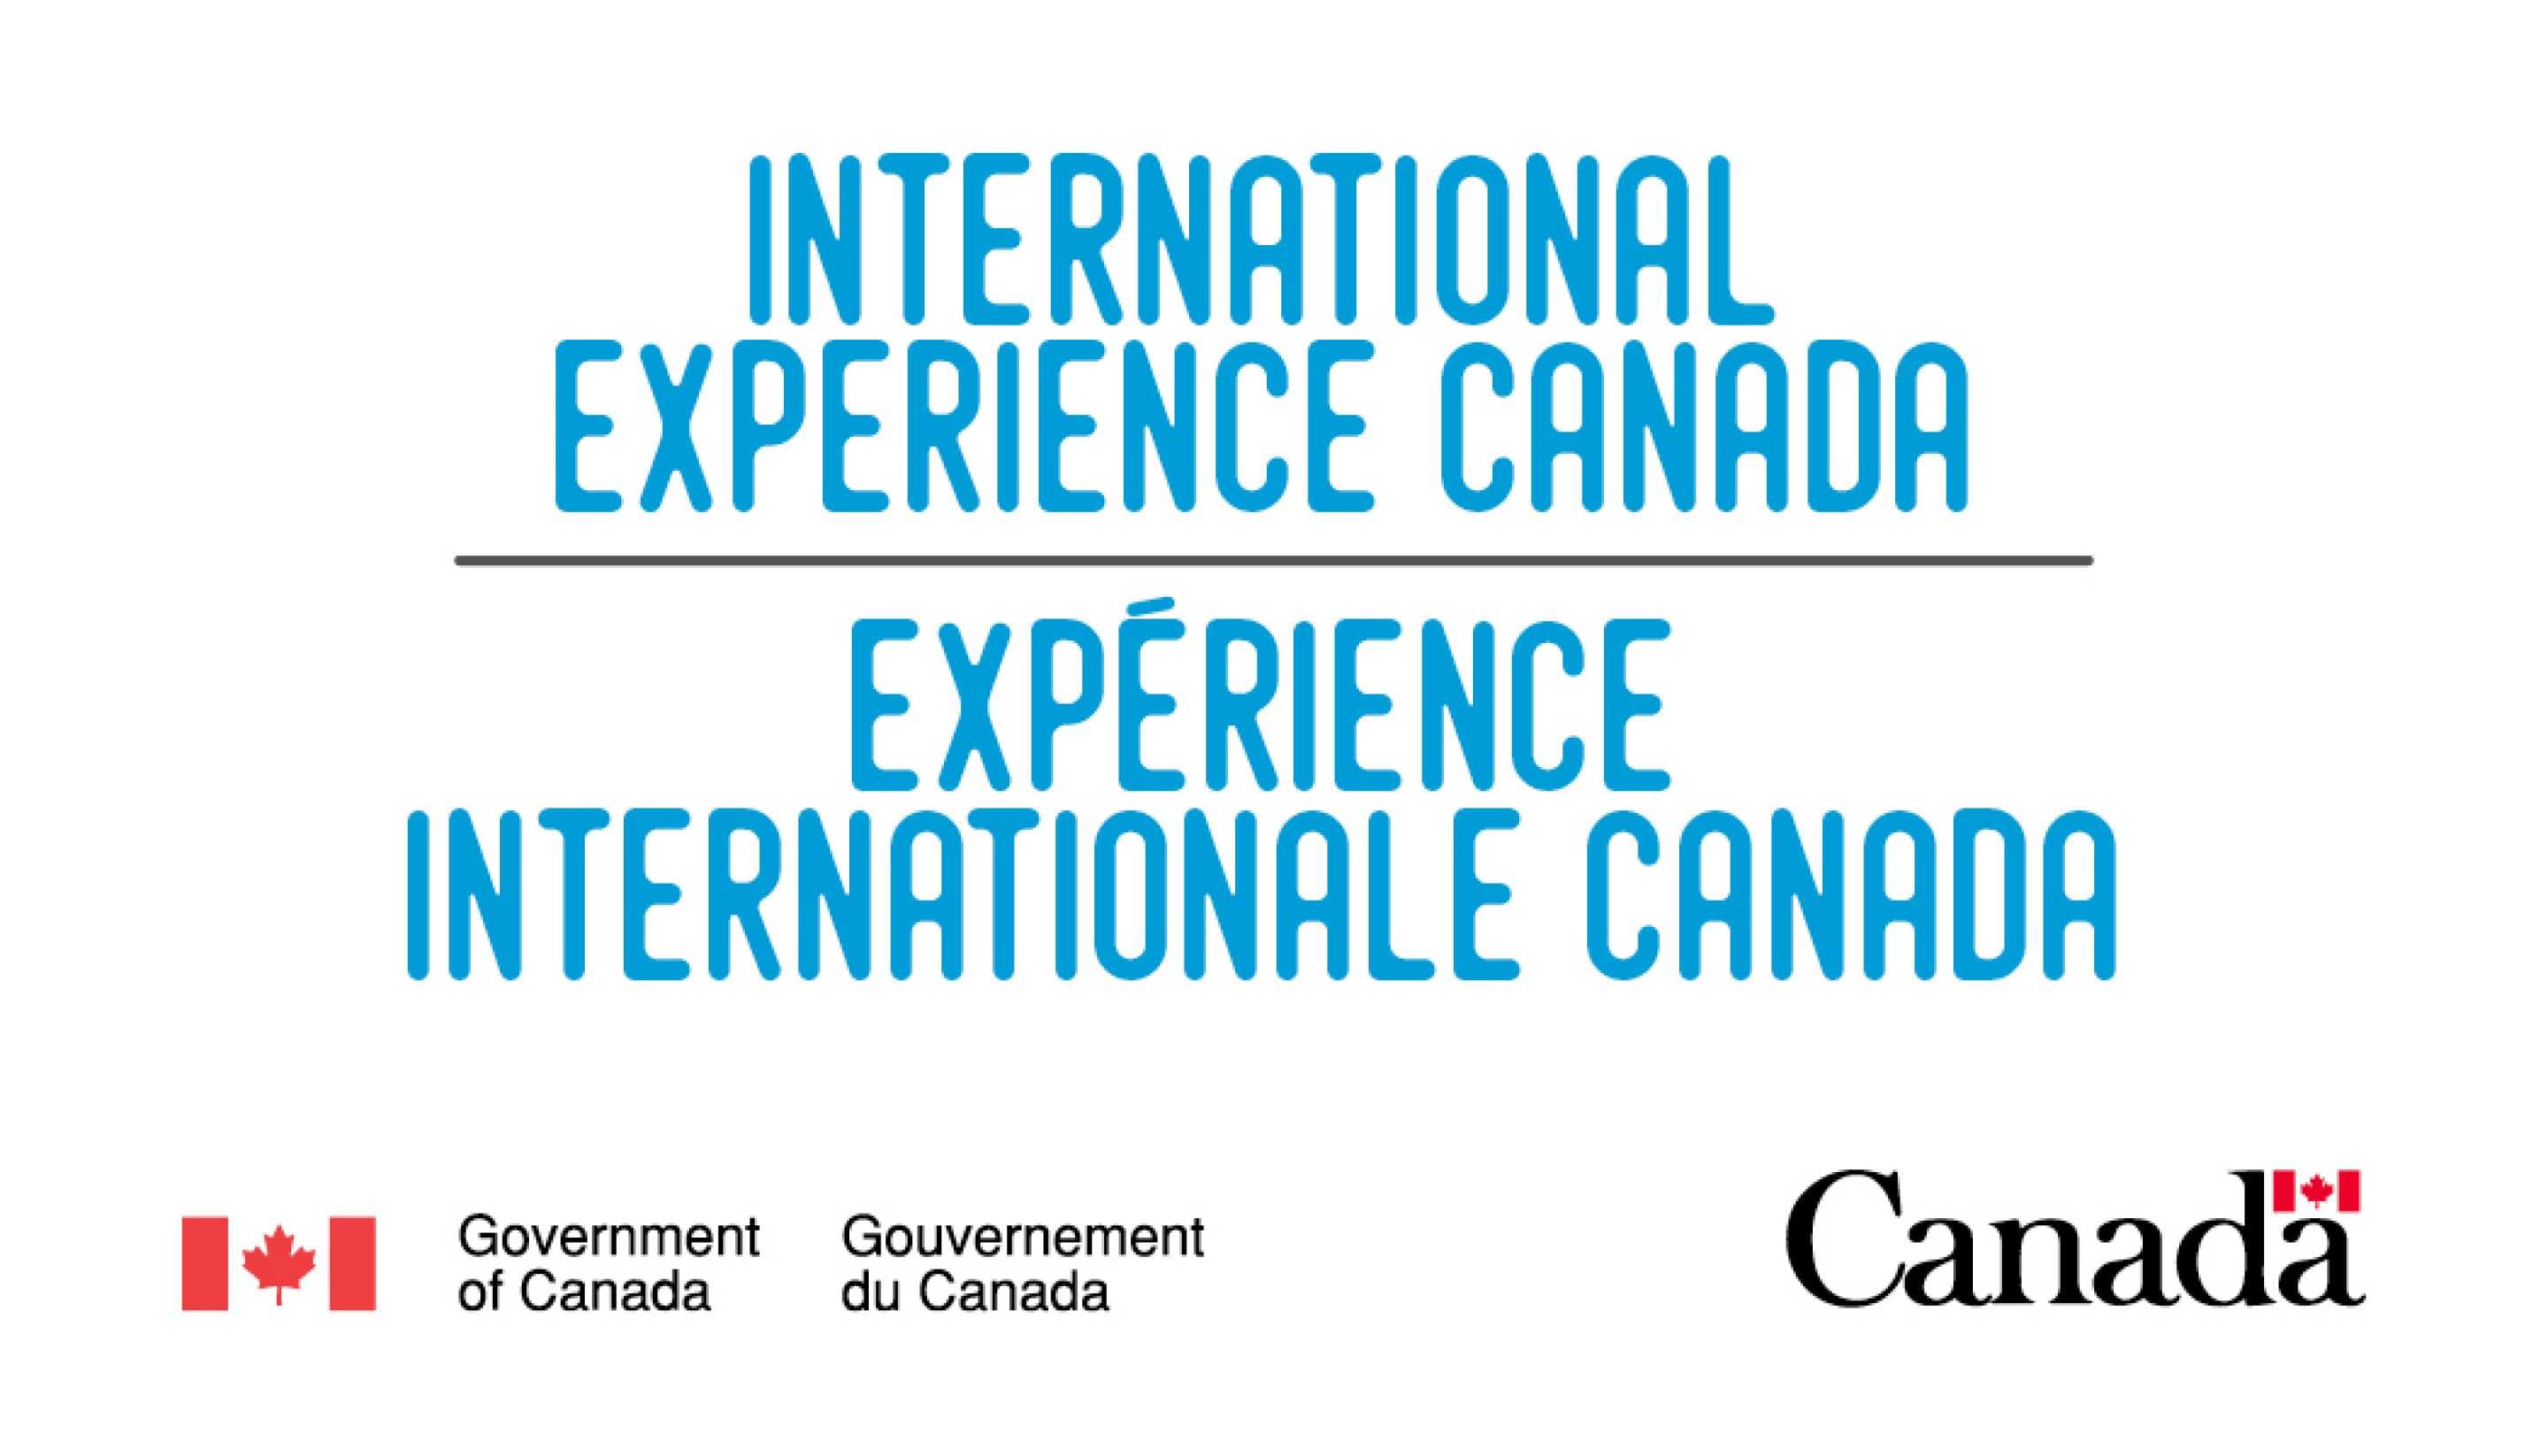 Consulate General of Canada (for Jobs in Canada)